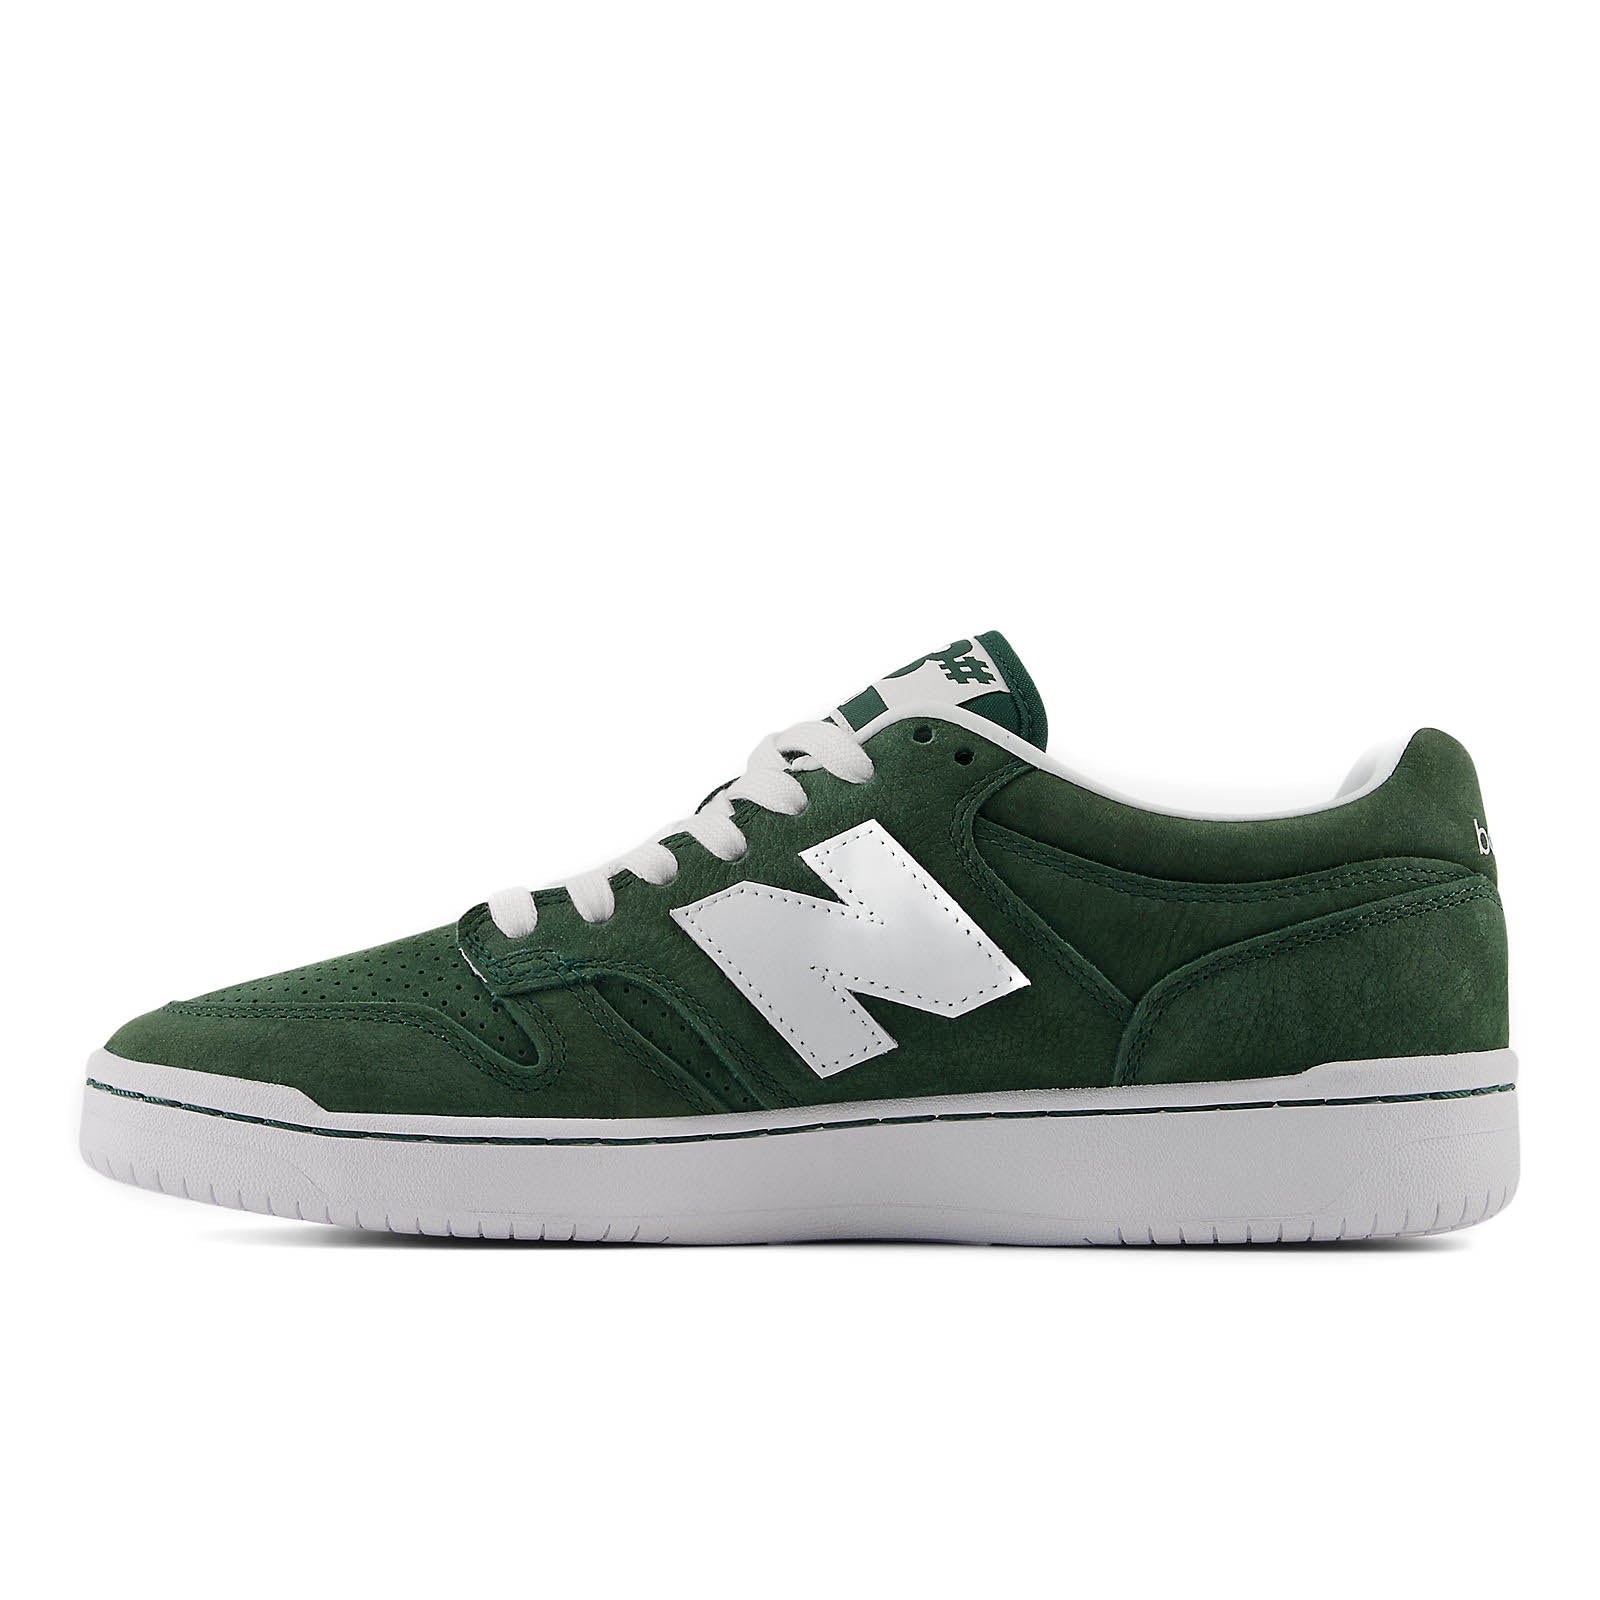 NB Numeric 480 - Forest Green